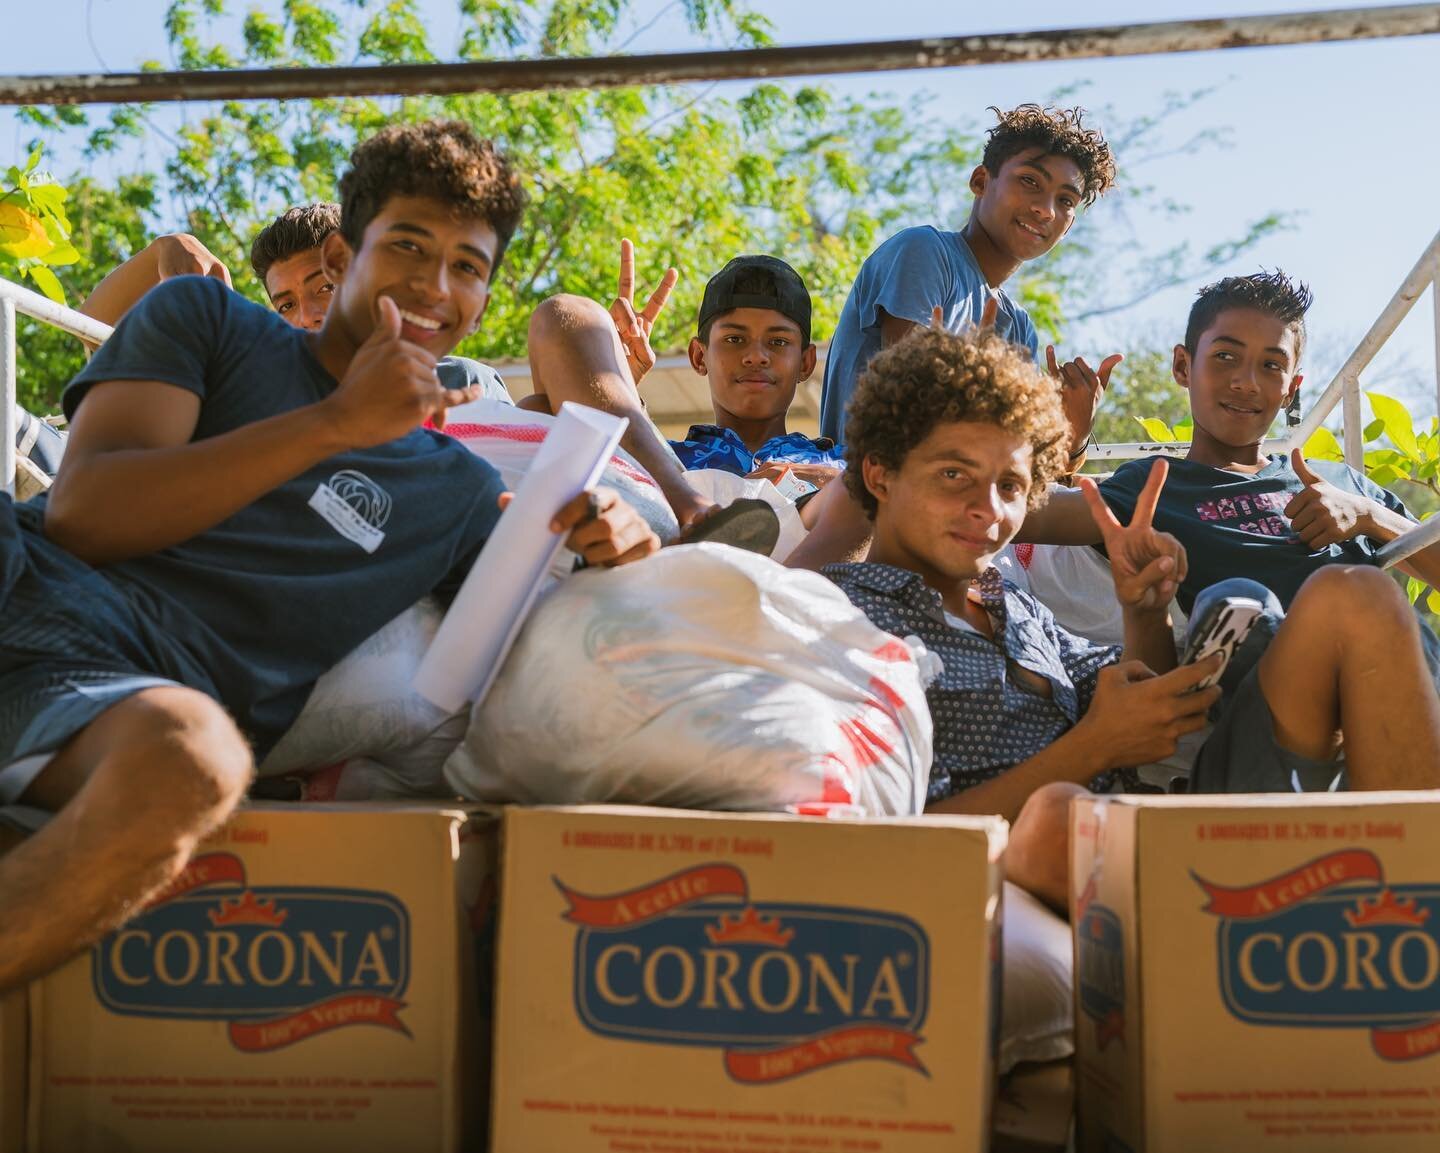 Yes the boys surf their hearts out, but a big part of the team is giving back to the community and hard work. This involves all the guys rallying up, packing up essential food supplies for local families in need, and then piling into a truck and deli